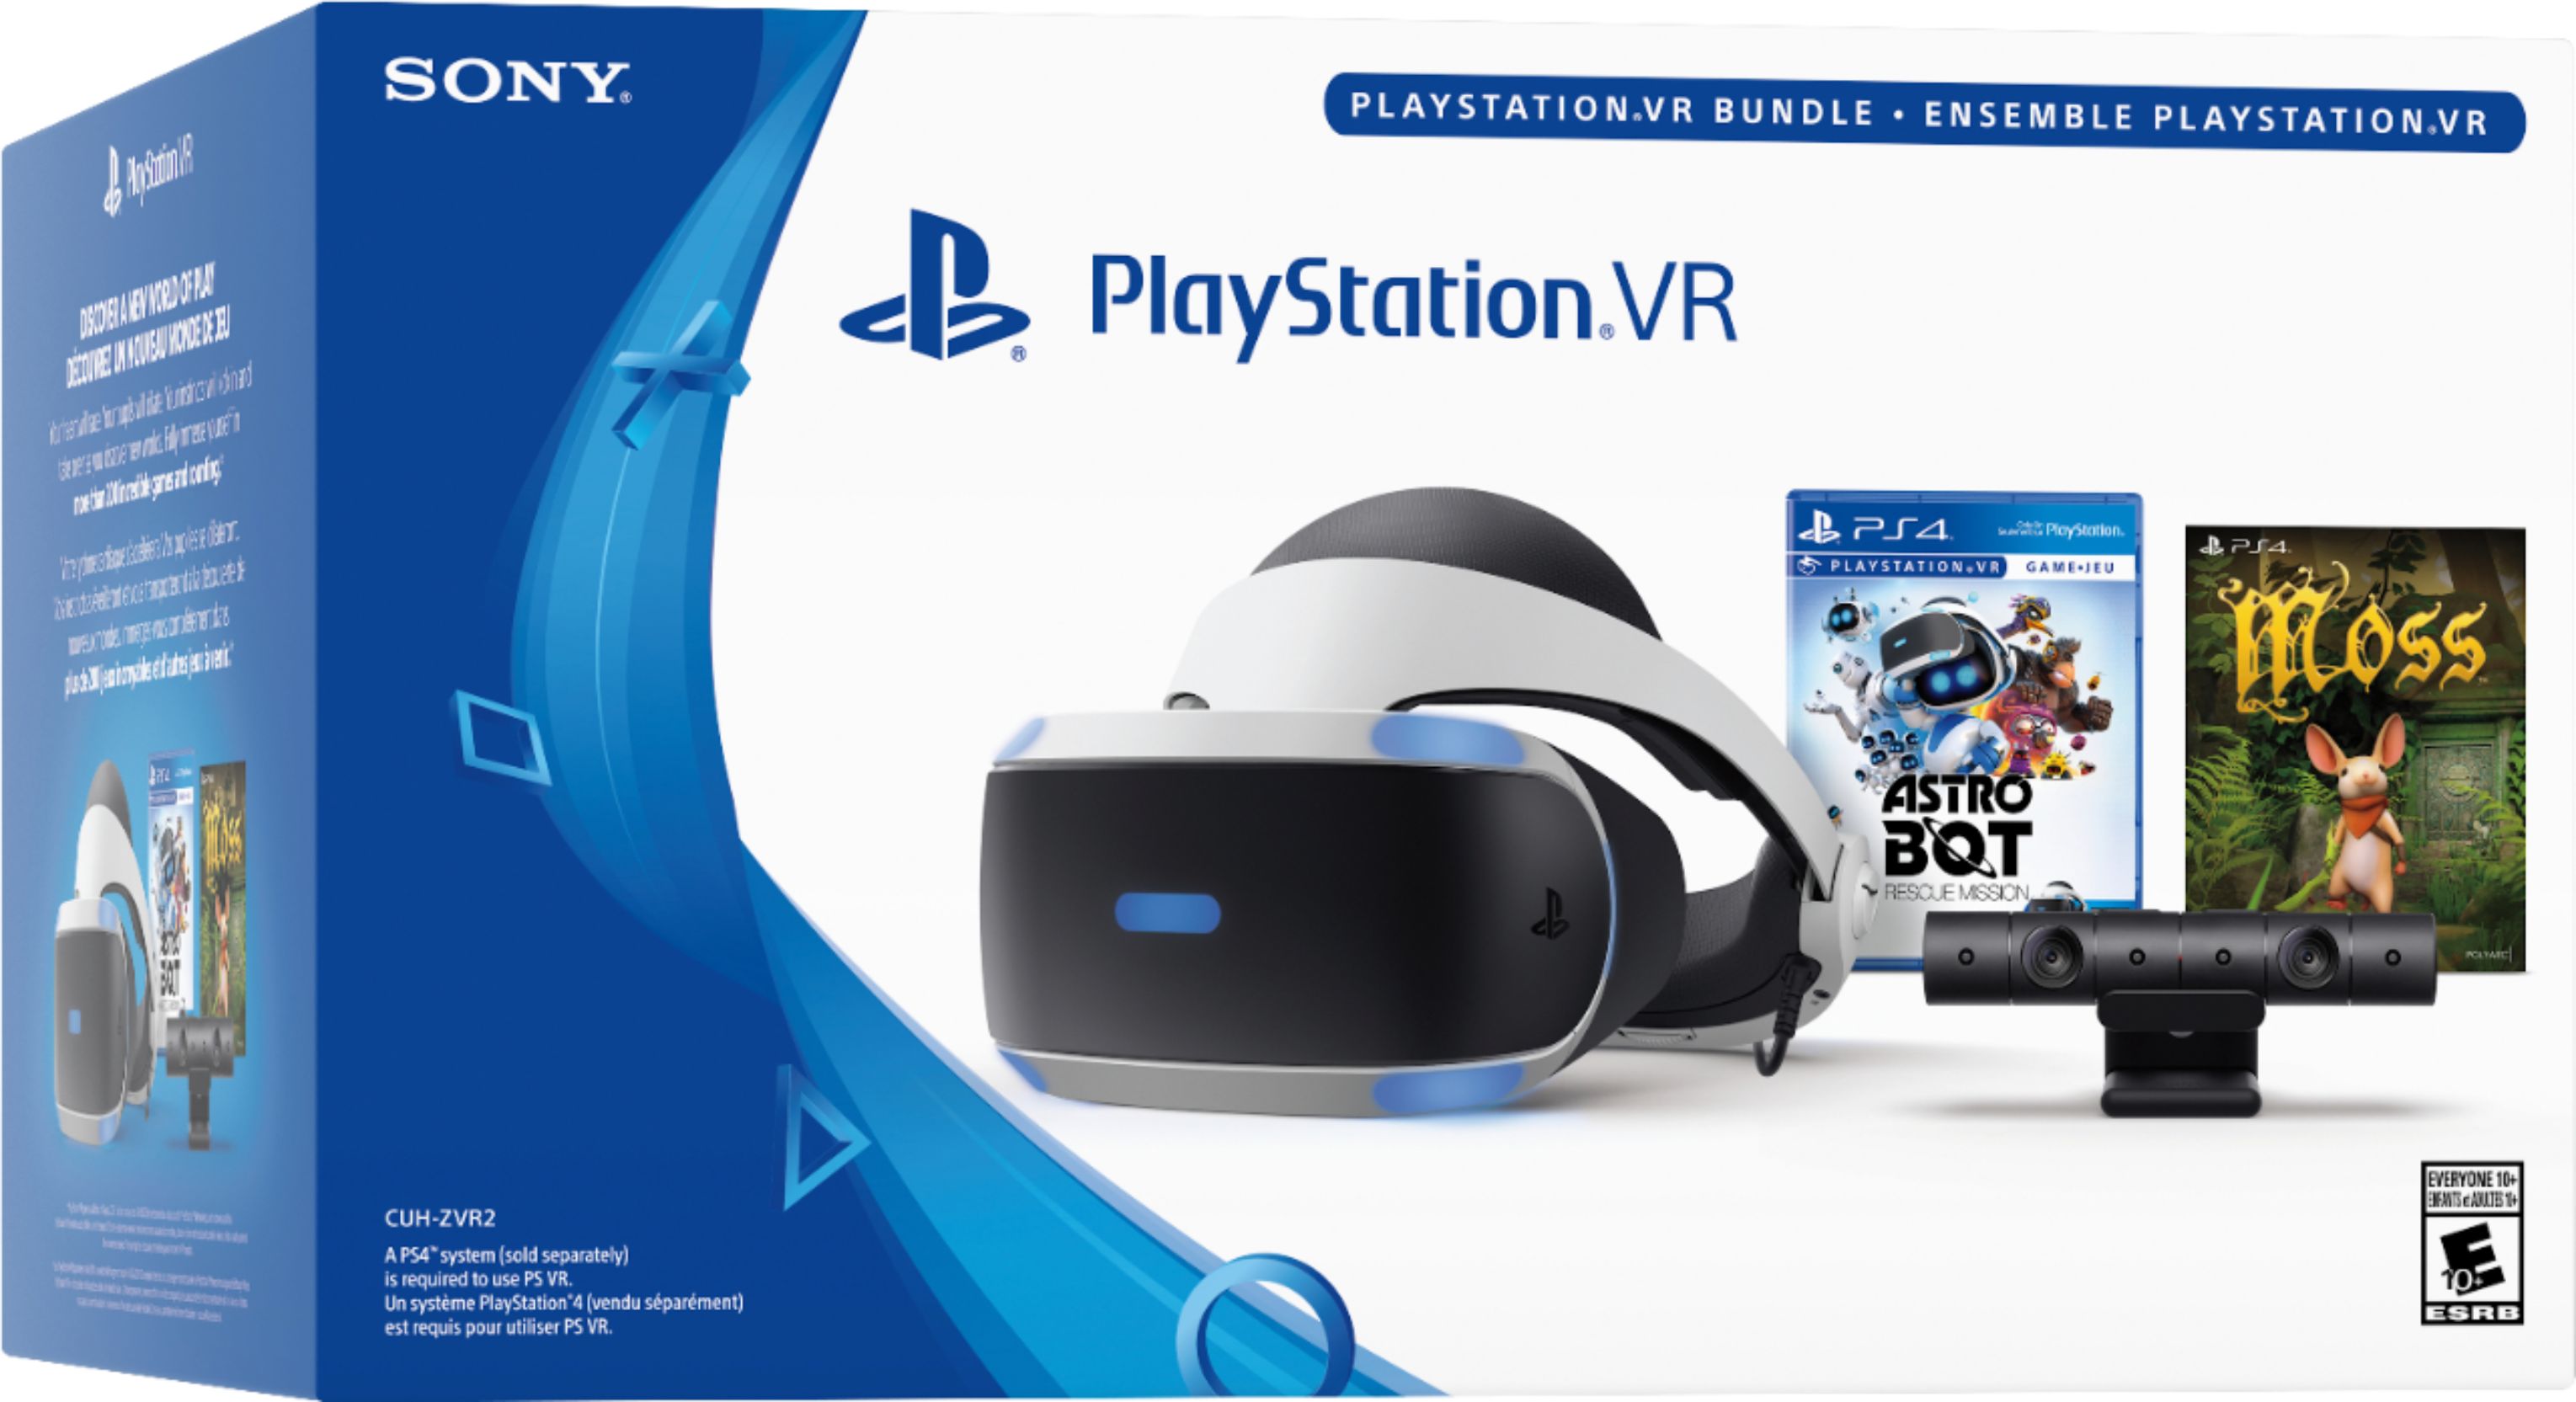 New PSVR Updates and Games